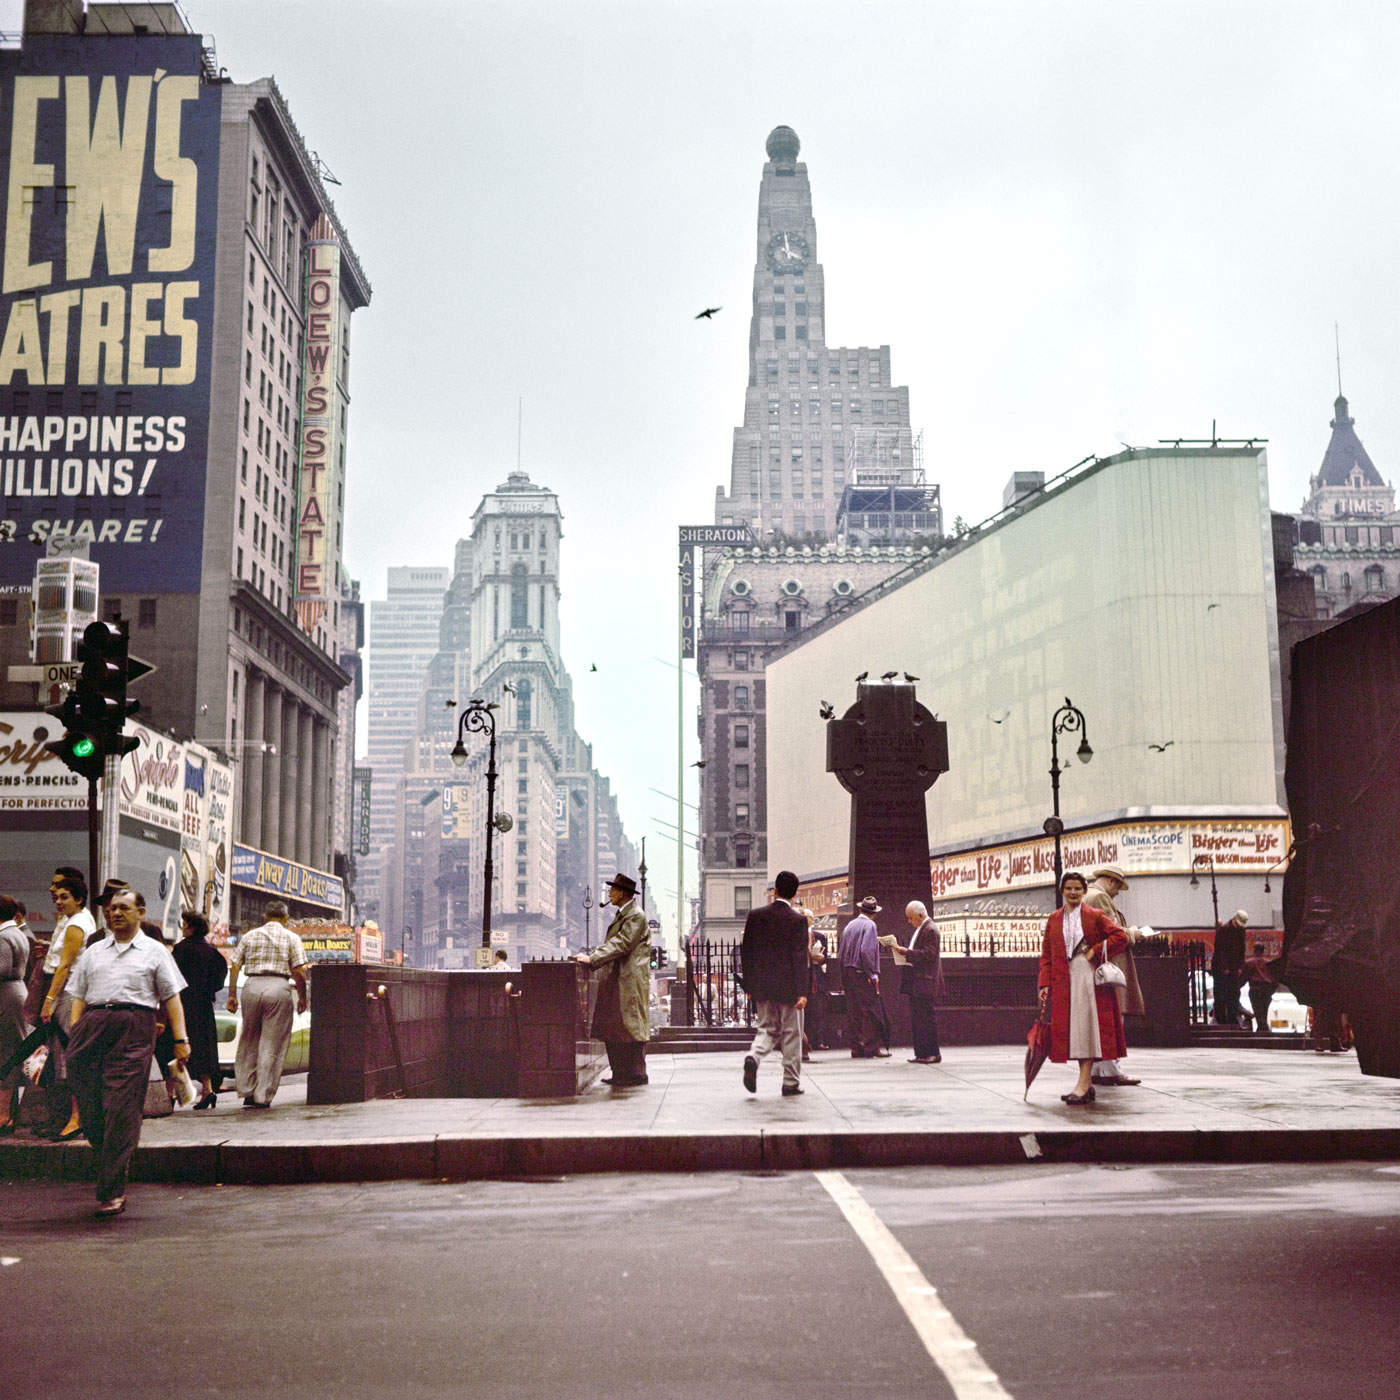 With his eyes wide open 03: Max Näder “Times Square, New York” (1957)